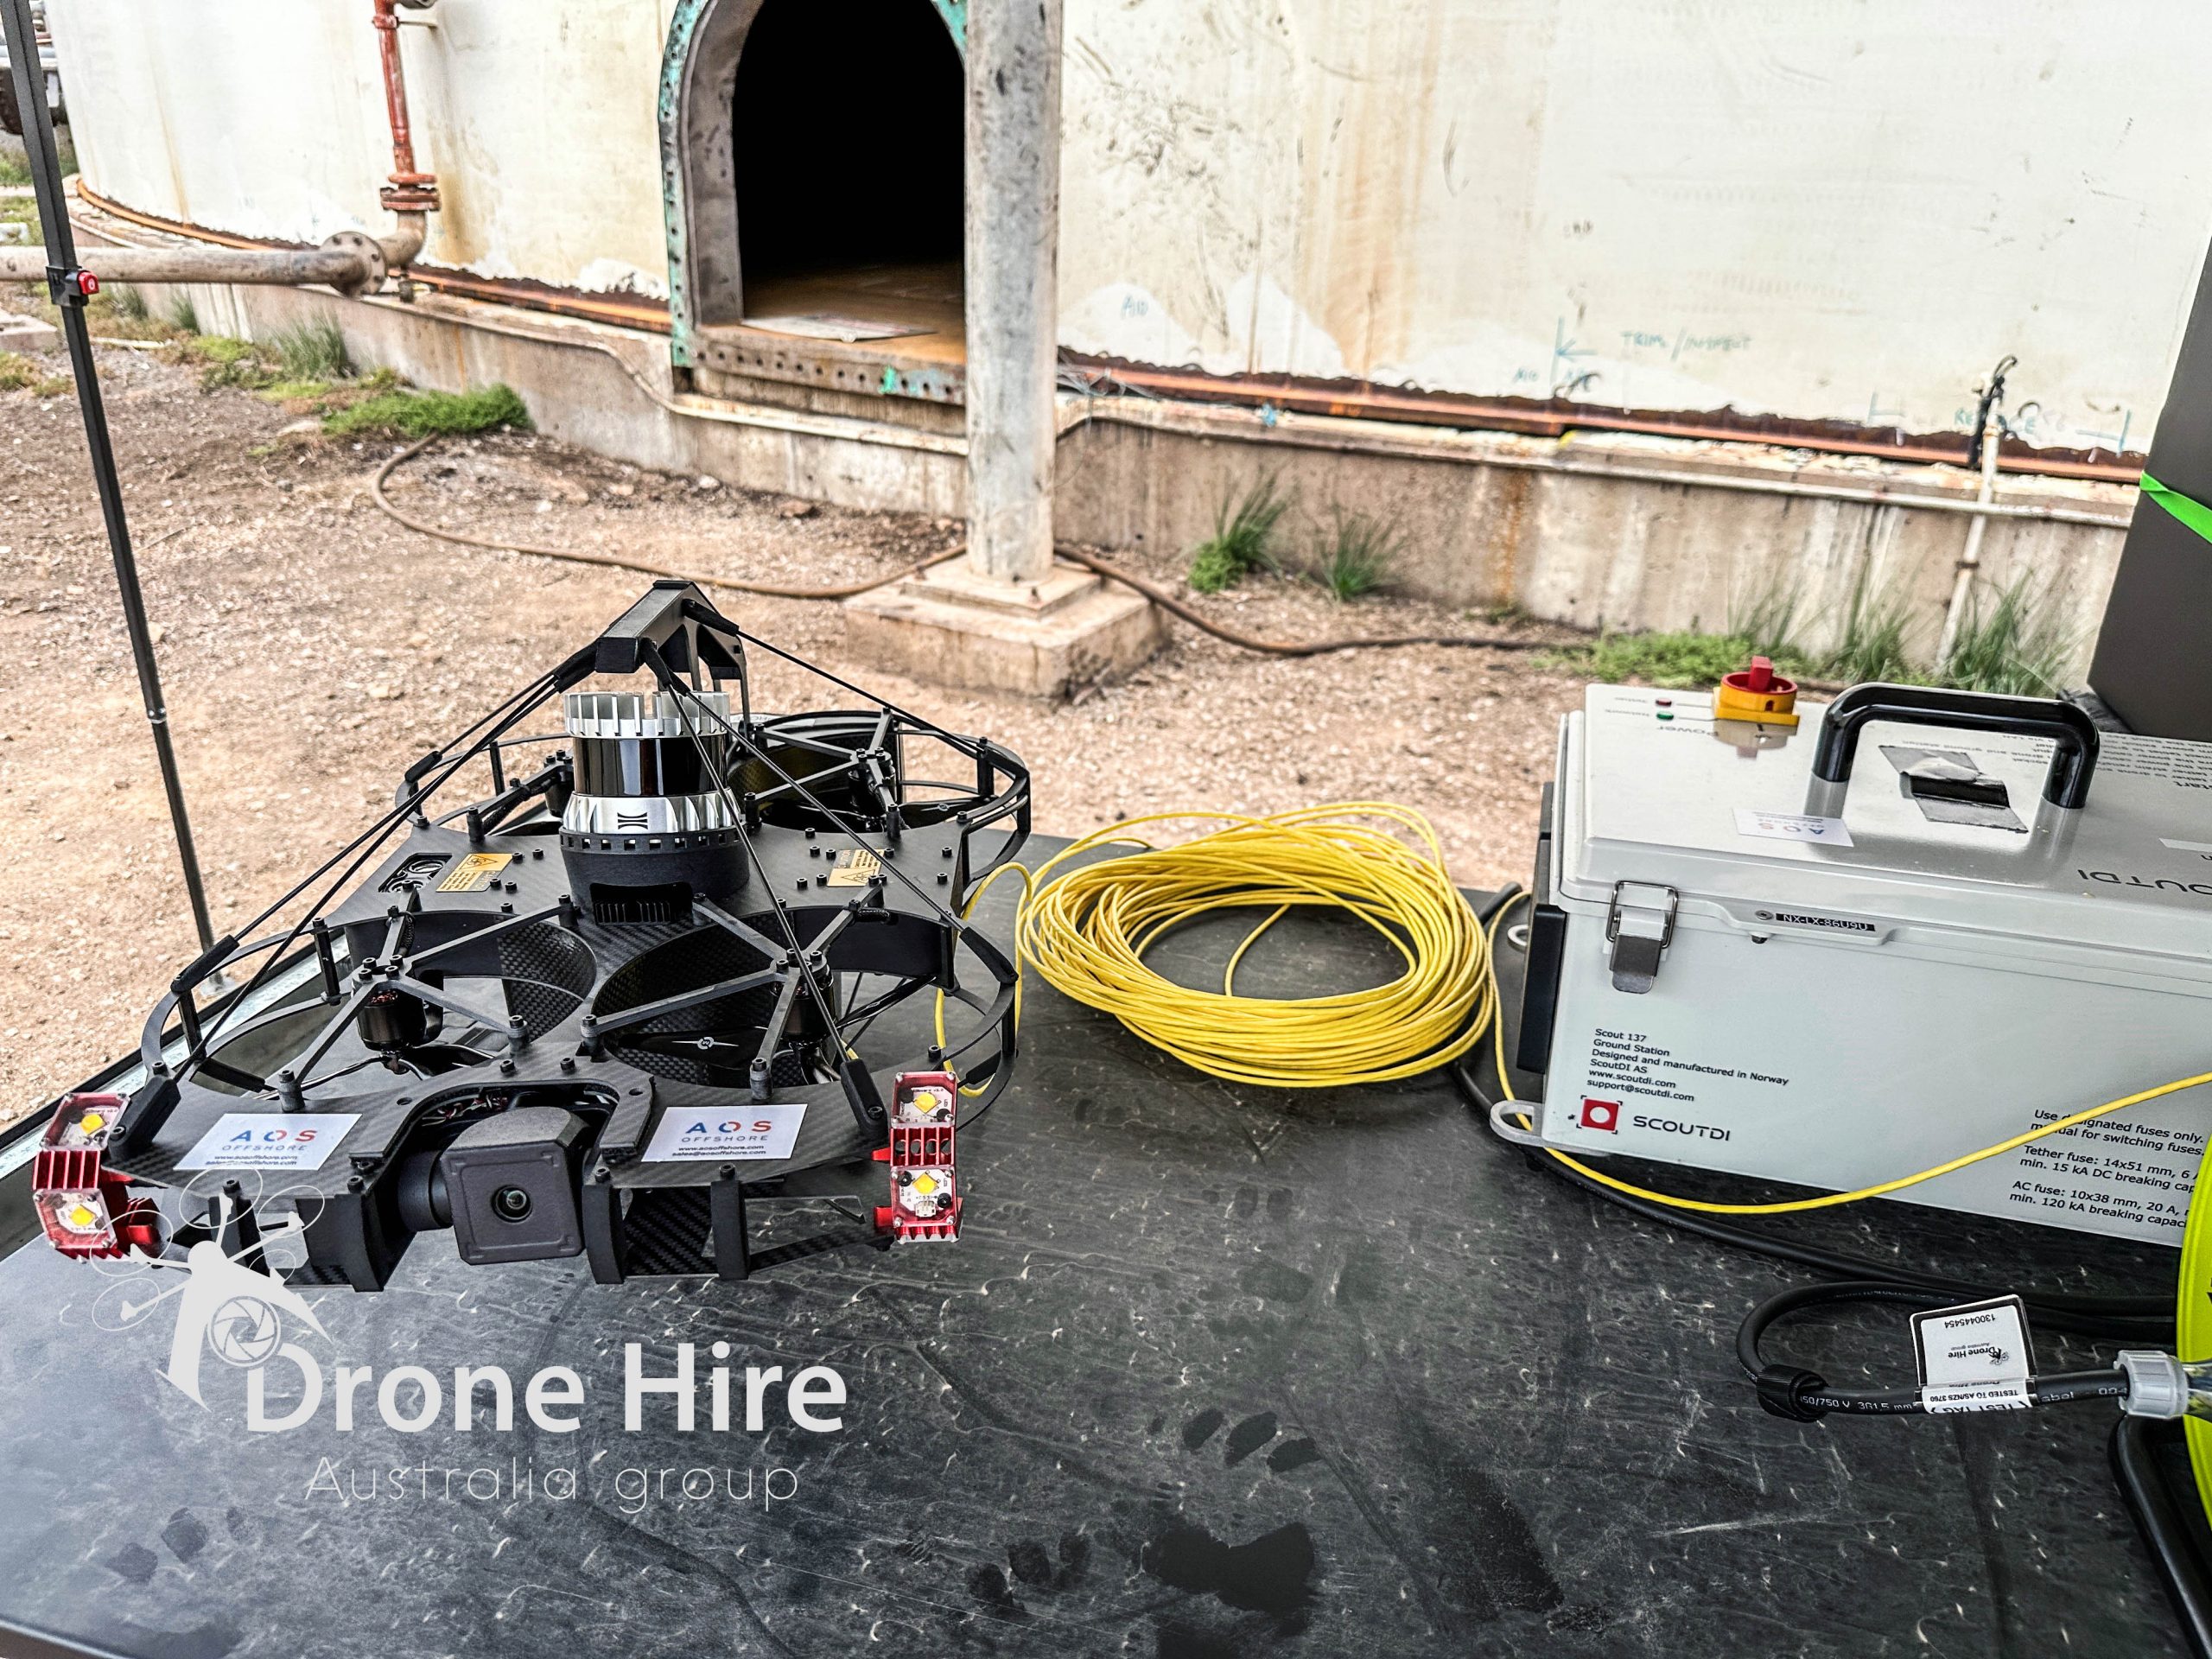 CONFINED SPACE INSPECTION DRONE SCOUT 137 OIL AND GAS ADELAIDE AUSTRALIA